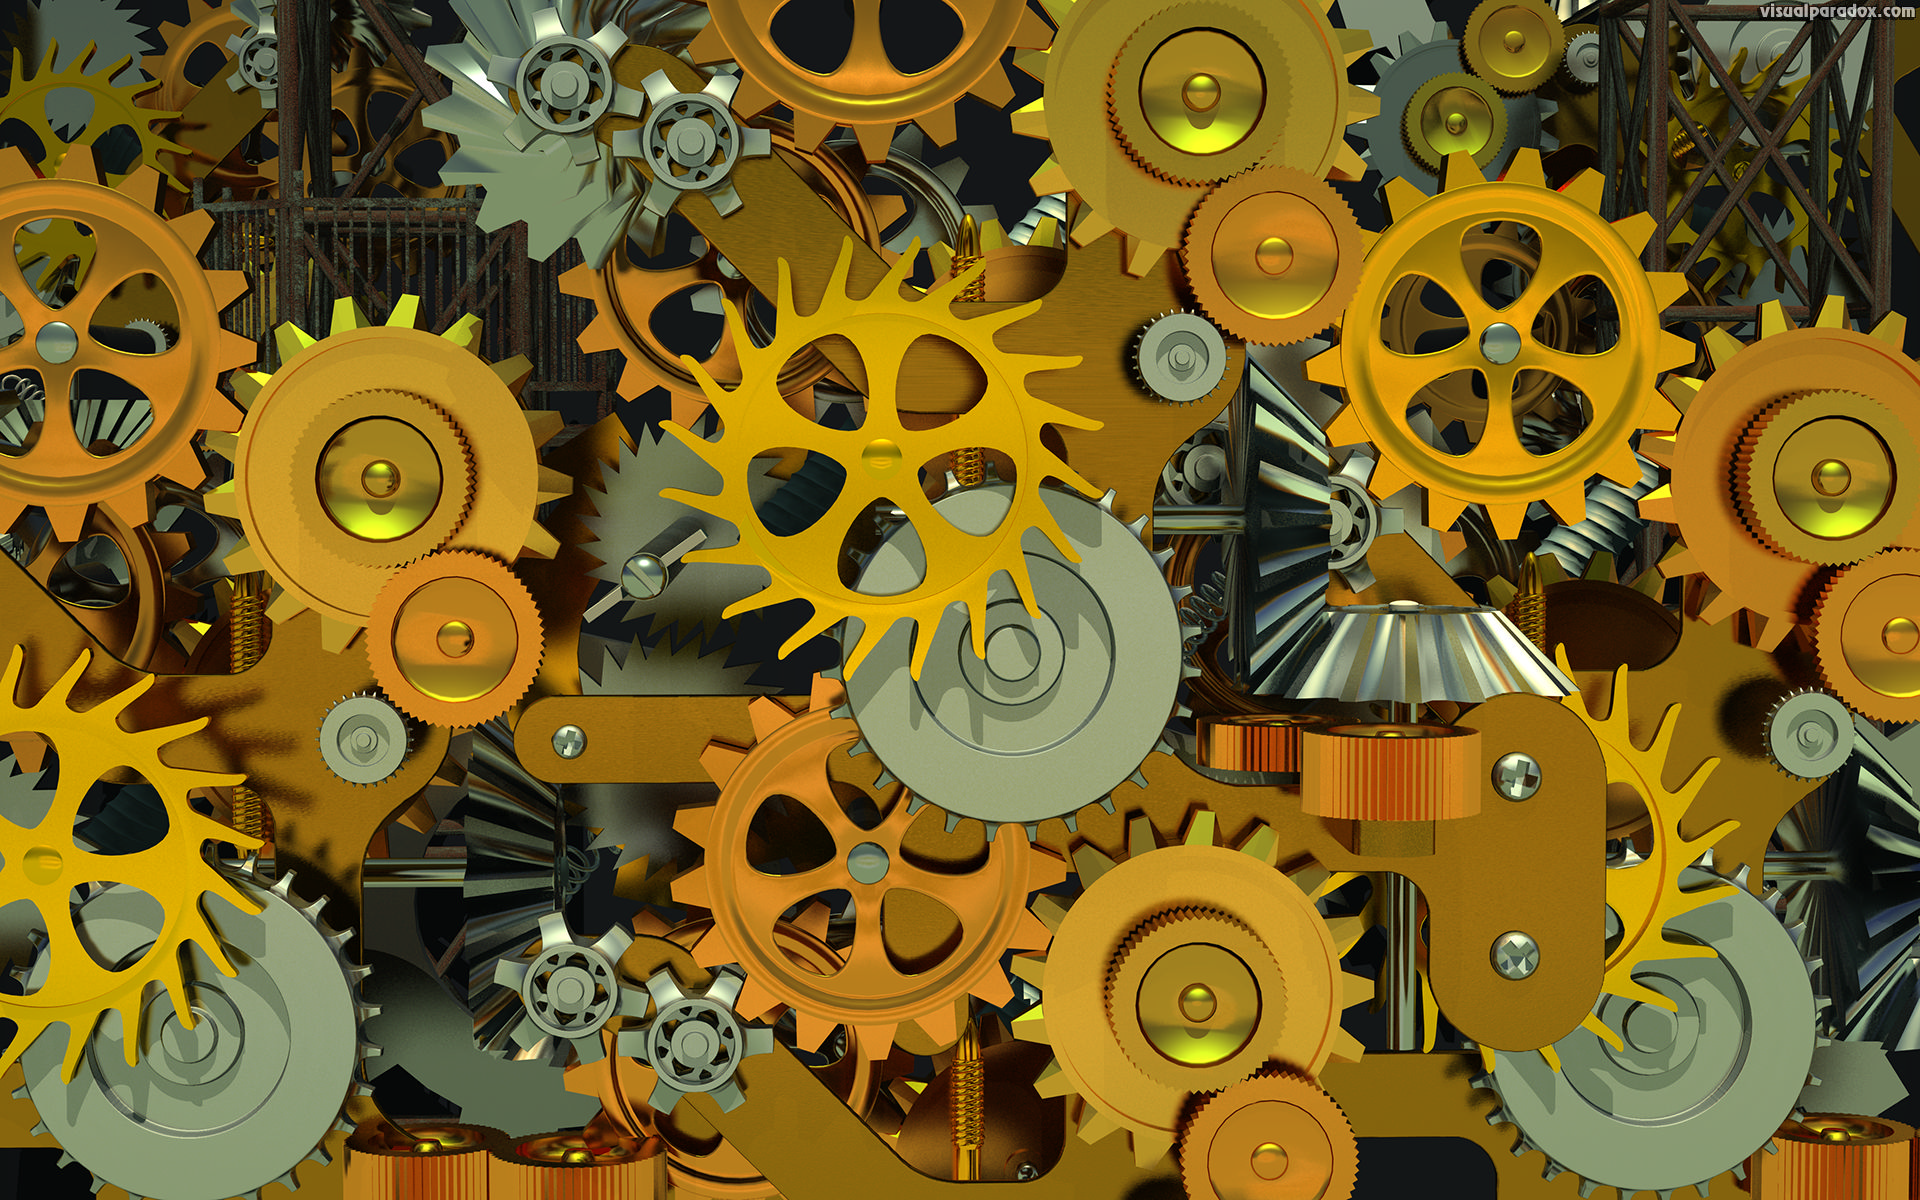 abstract, background, brown, business, circle, clock, clockworks, cog, cogwheel, collaboration, component, concept, connection, cooperation, design, element, engine, engineering, equipment, fit, gear, gears, gold, golden, graphic, illustration, industrial, industry, inner, machine, machinery, macro, mechanical, mechanism, mesh, meshing, metal, metallic, motion, orange, part, power, rotate, rotation, round, steel, teamwork, technical, technology, teeth, turn, watch, wheel, work, works, yellow, 3d, wallpaper